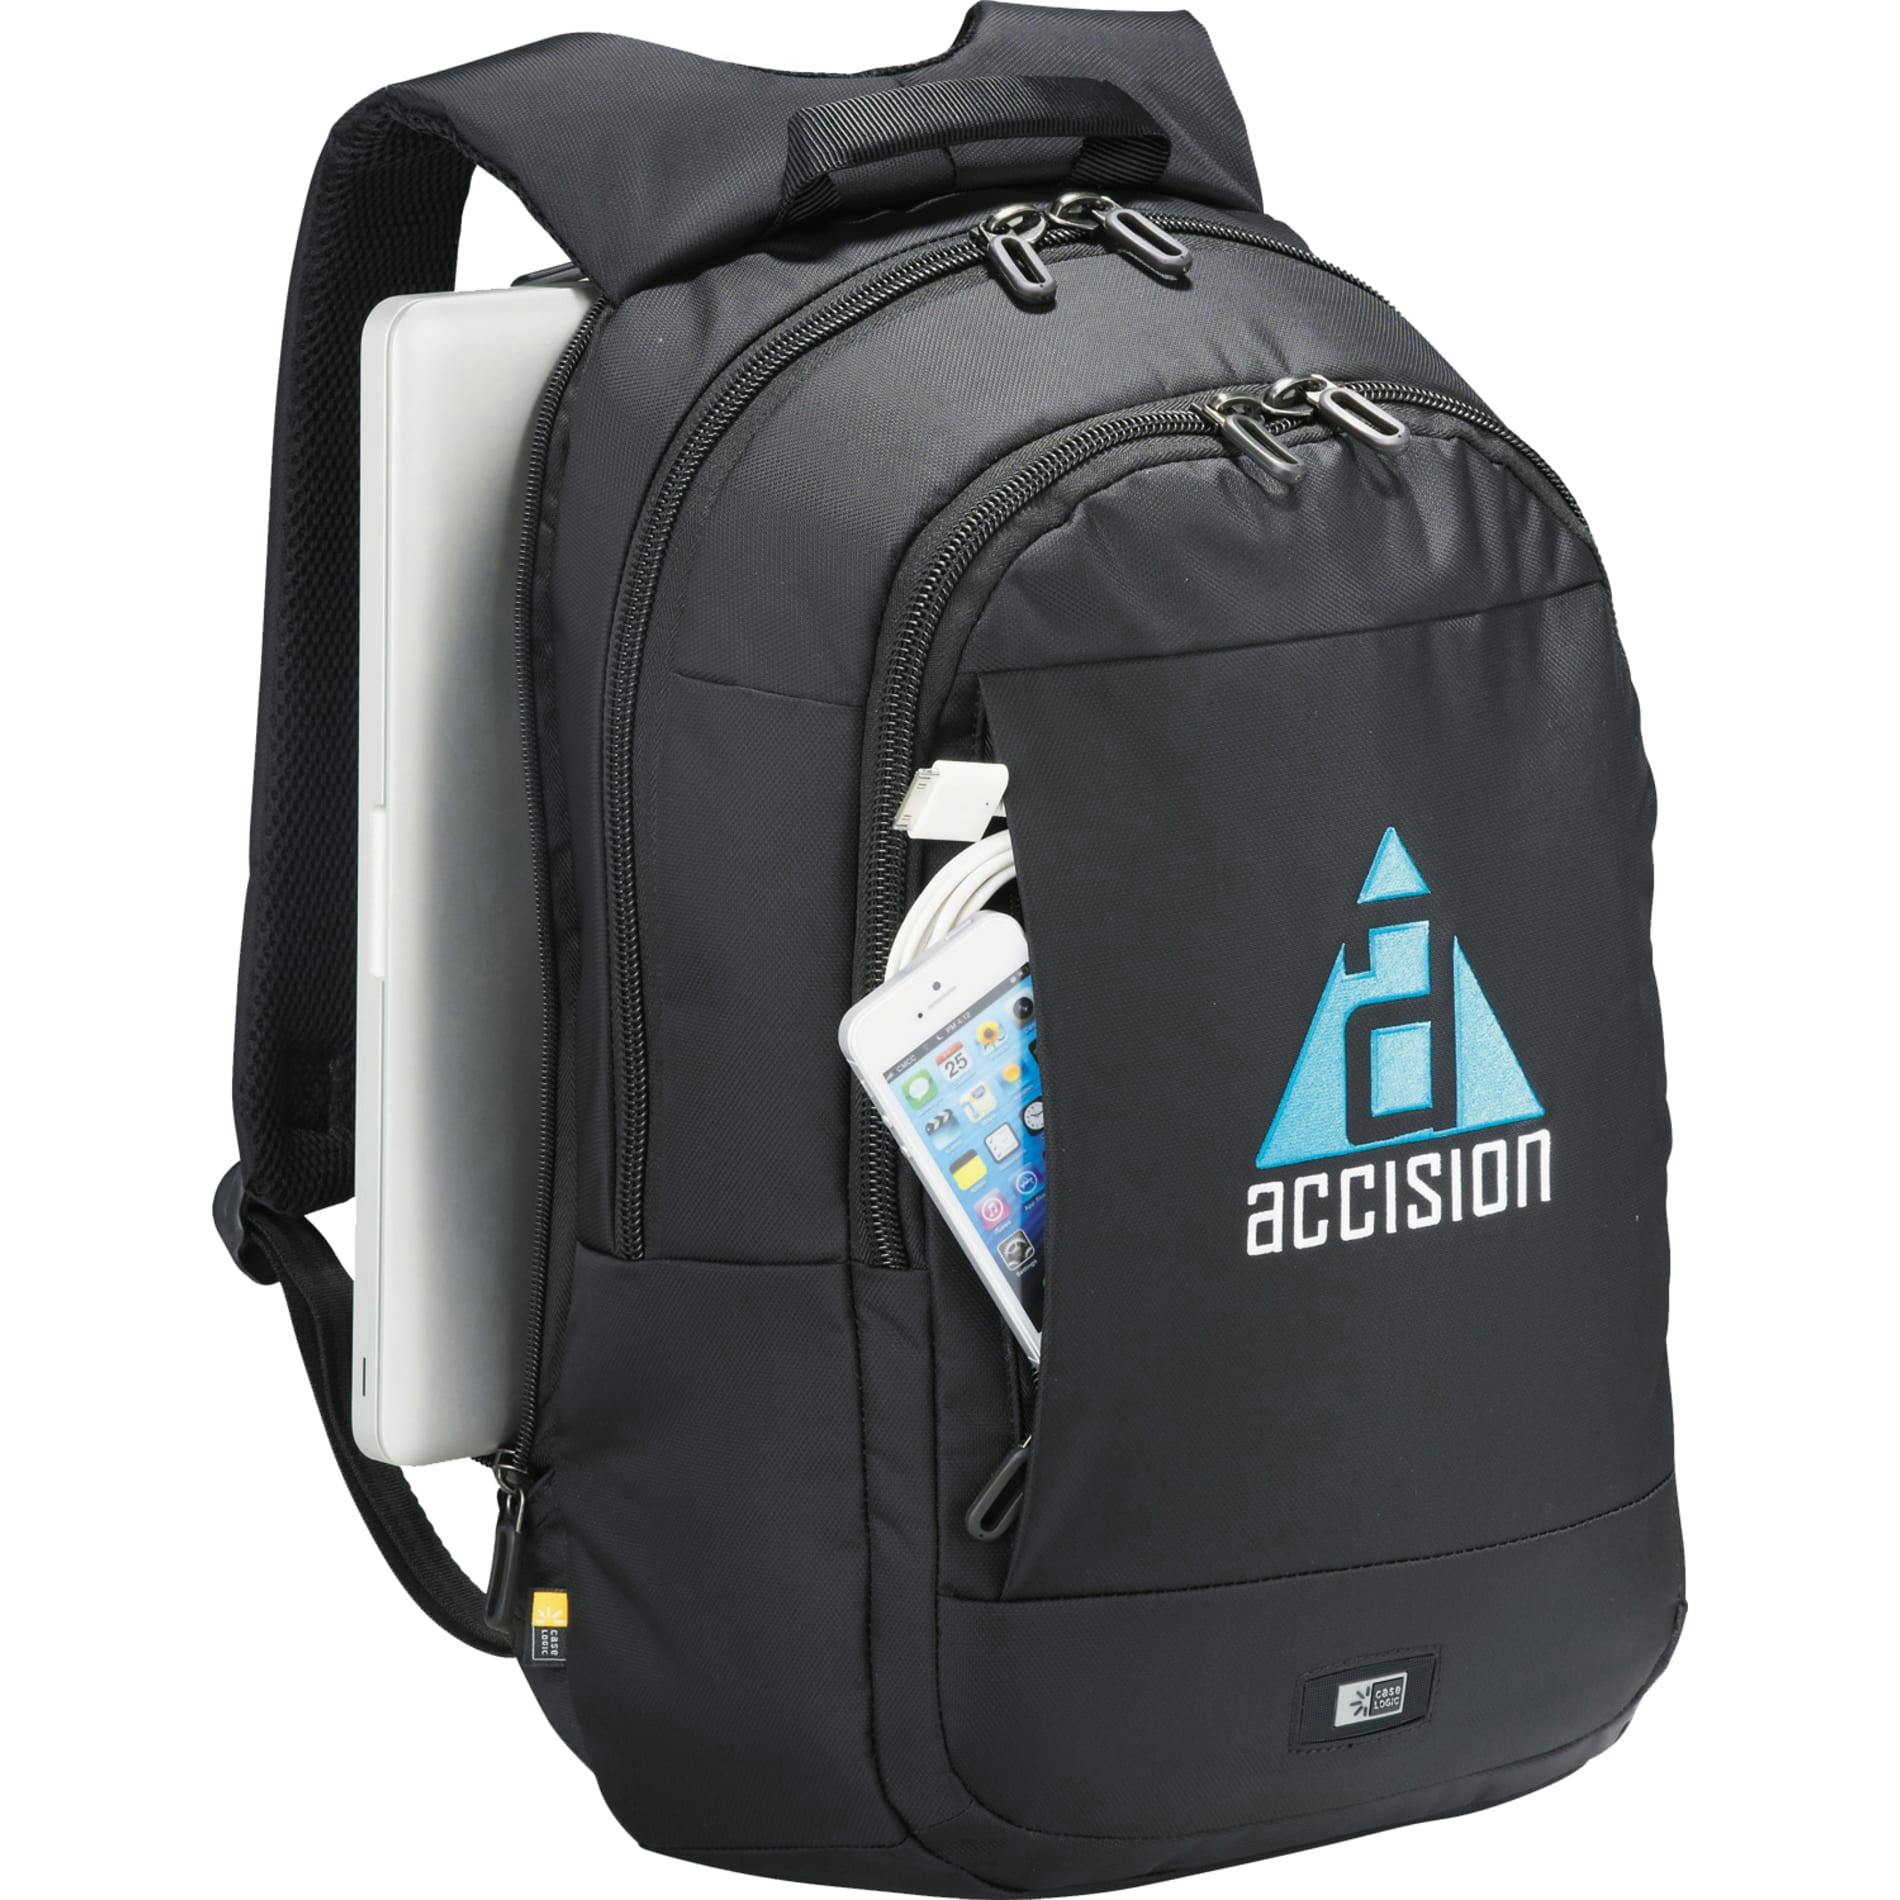 Case Logic 15" Computer and Tablet Backpack - additional Image 2